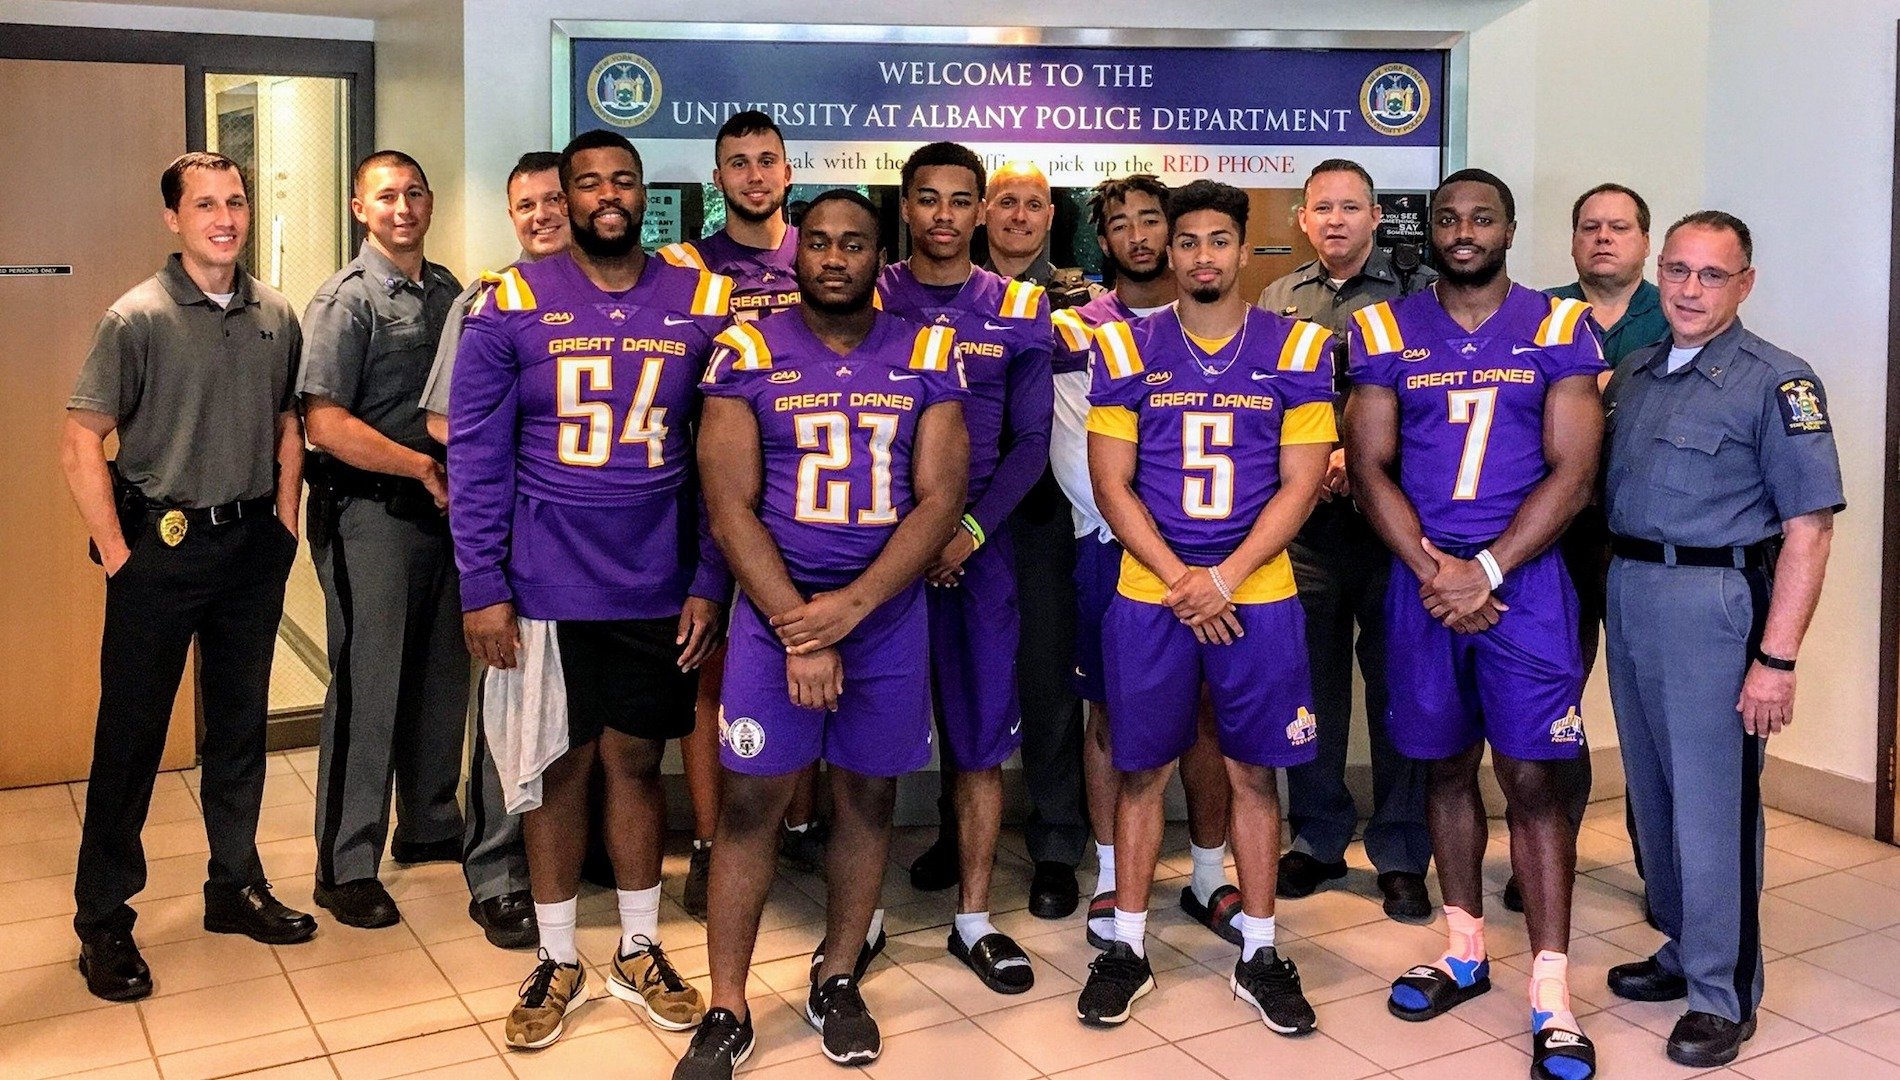 UPD Officers with UAlbany football team